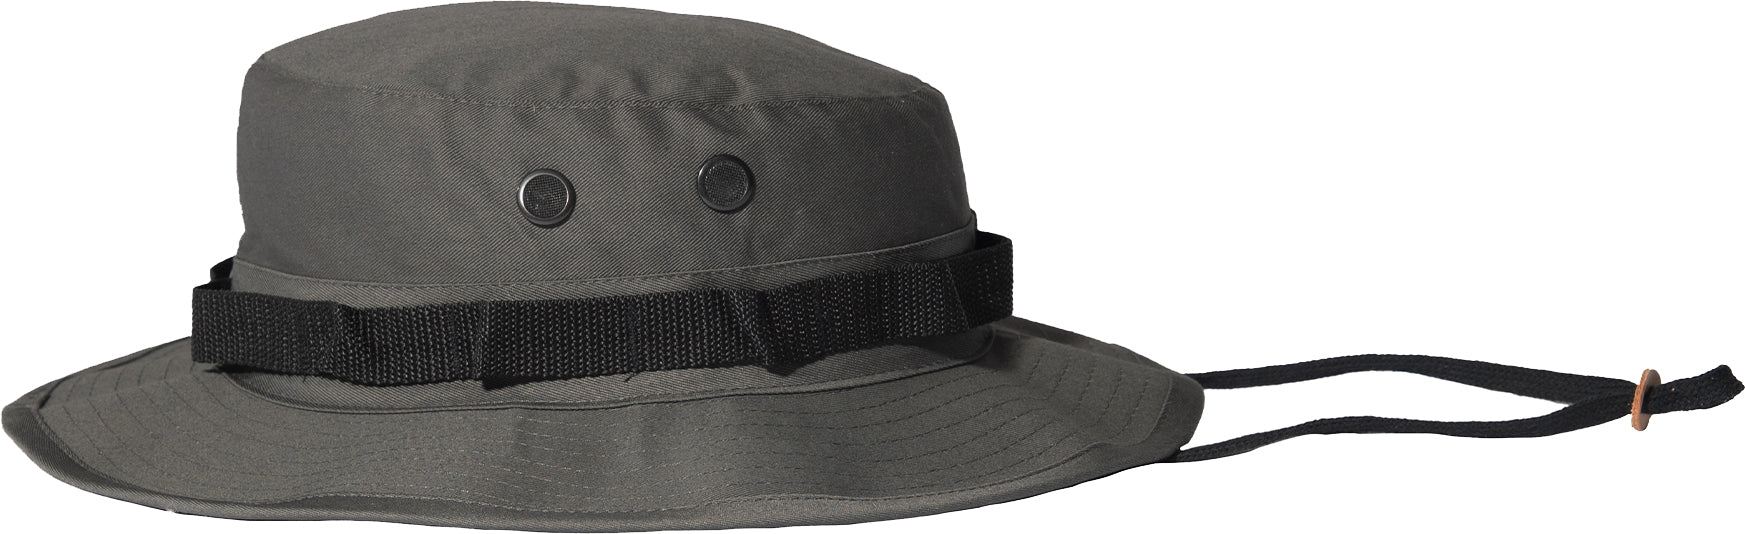 Charcoal Grey Boonie Hat